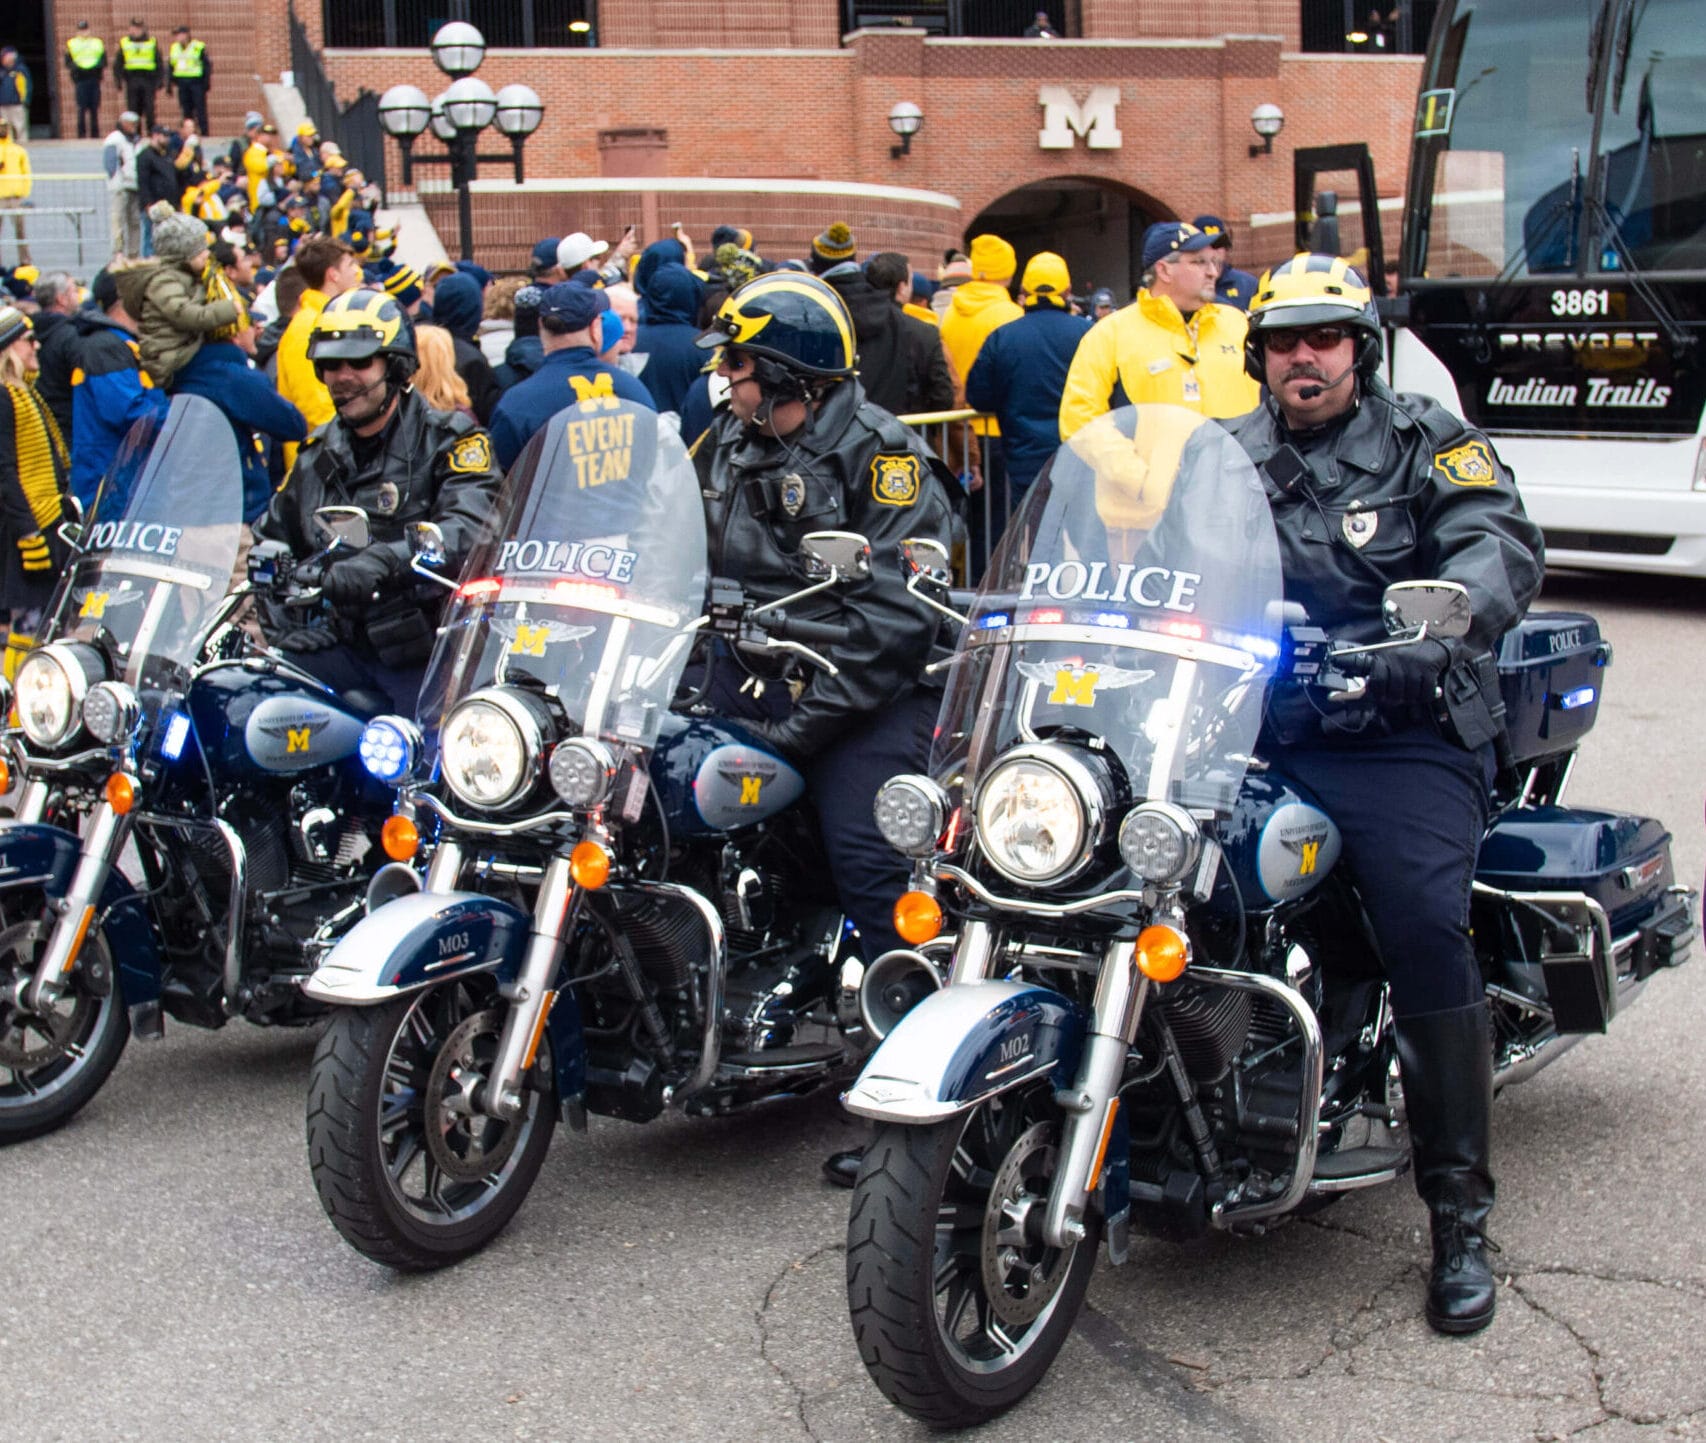 Public Safety and Security Police Officers at UM Ann Arbor